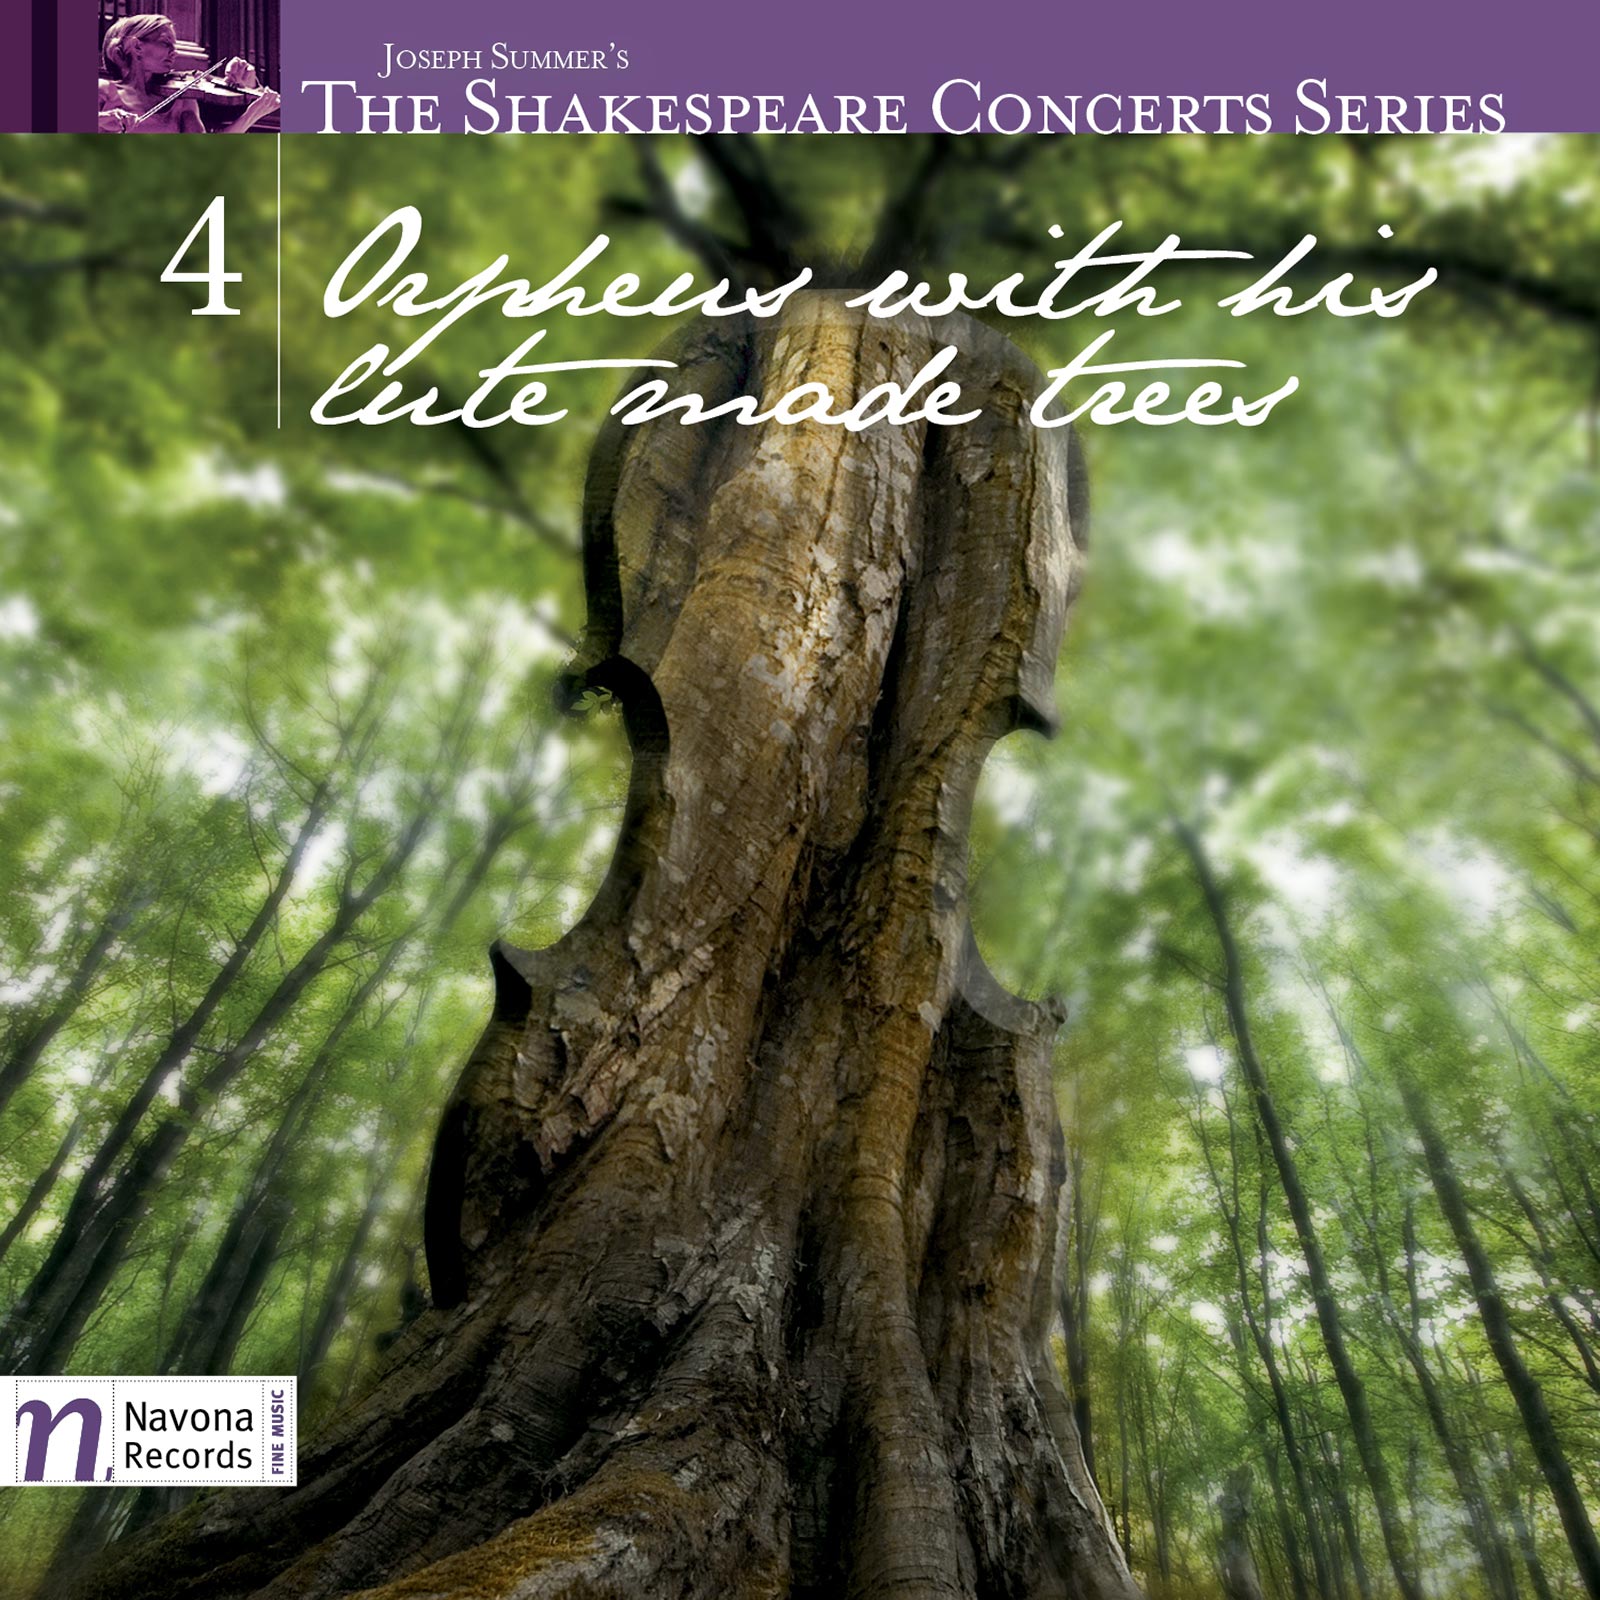 ORPHEUS WITH HIS LUTE MADE TREES - Album Cover